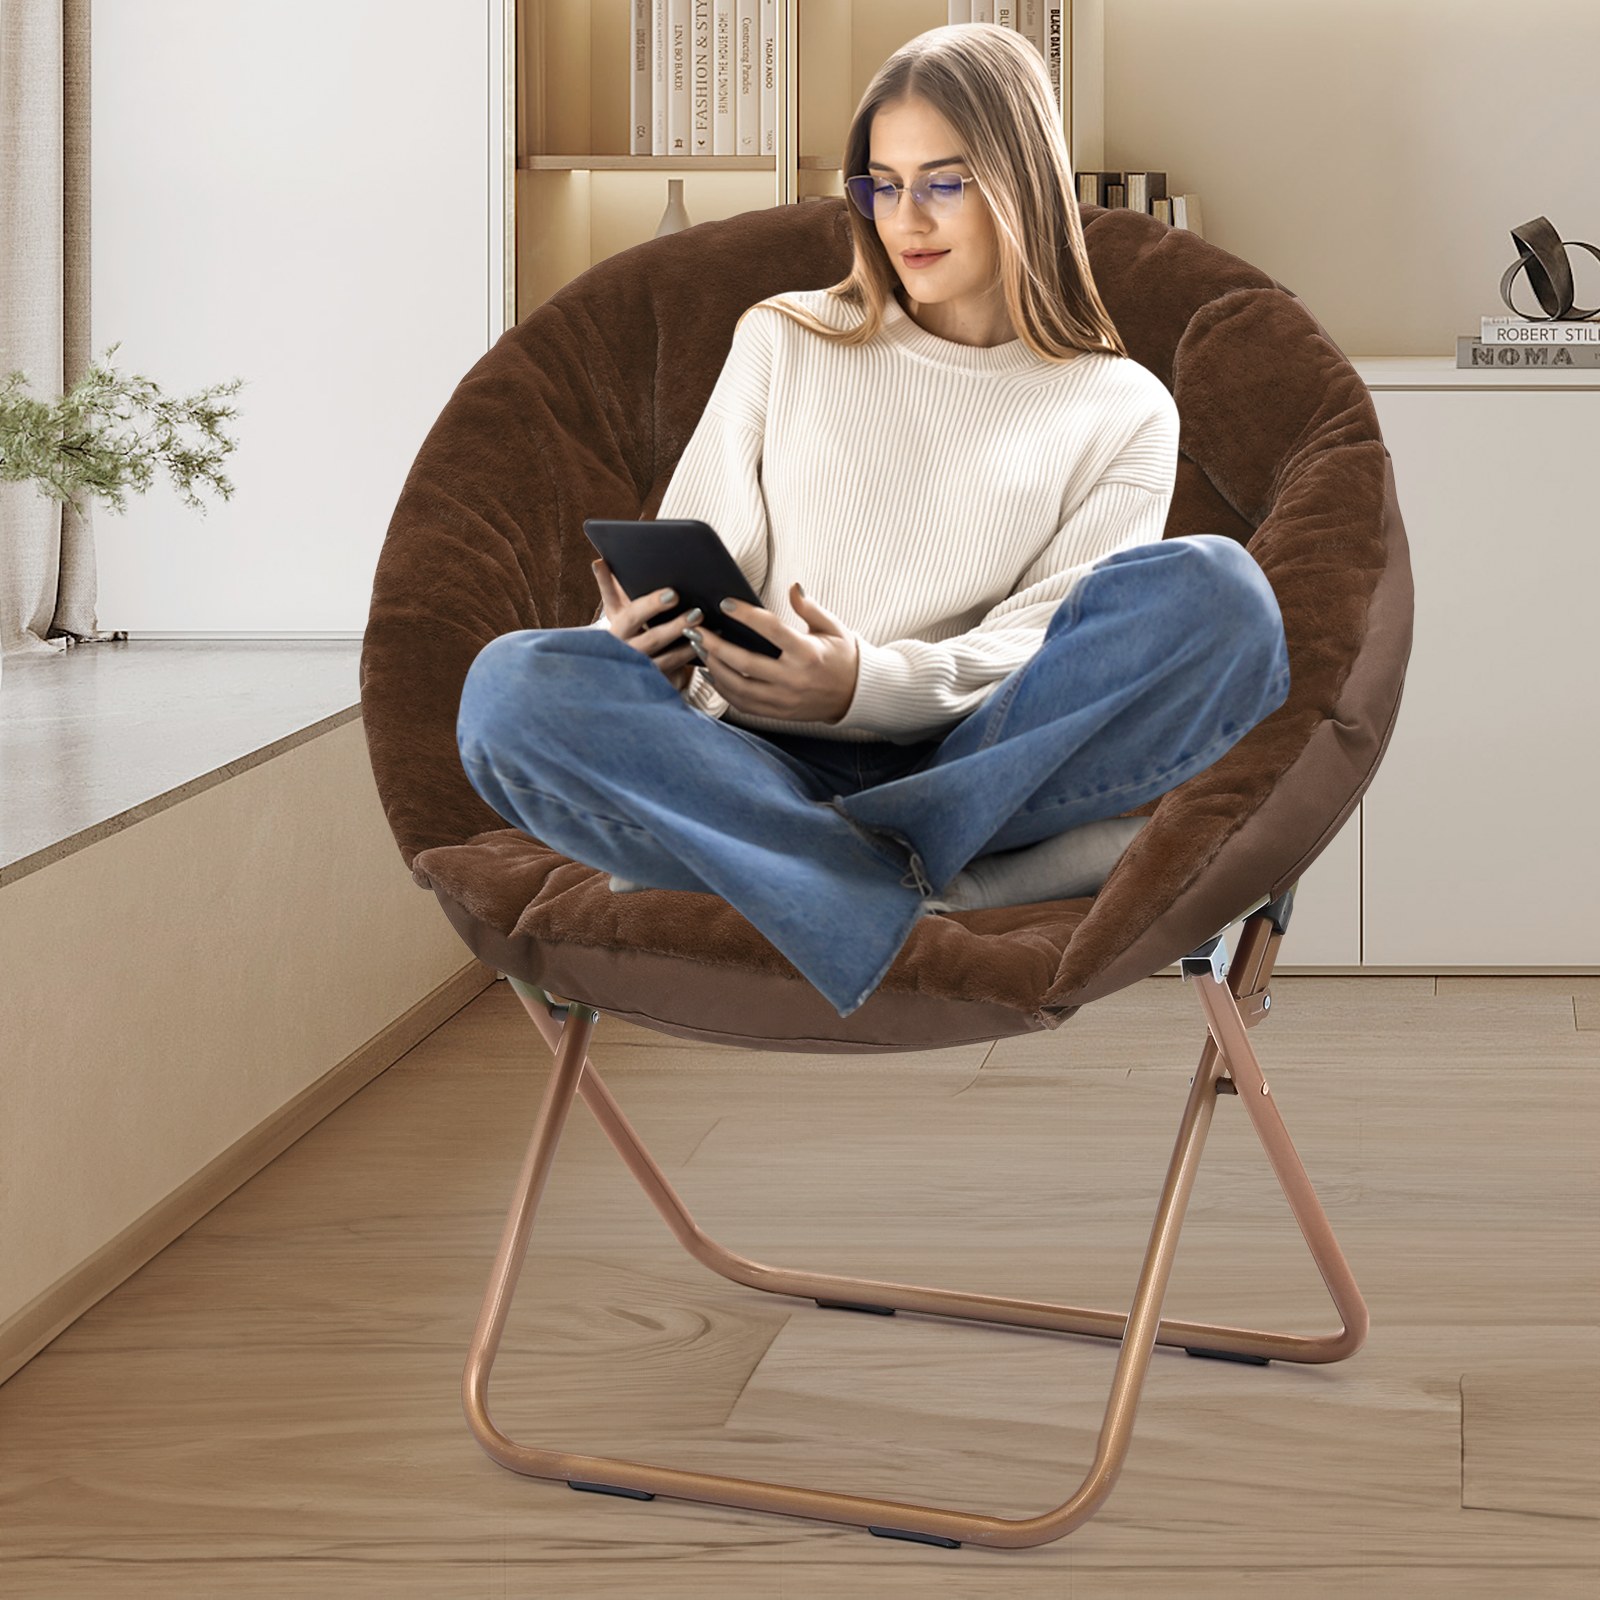 Magshion Folding Lounge Chair Comfy Faux Fur Saucer Chair, Cozy Moon Chair Seating with Metal Frame for Home Living Room Bedroom, Brown - image 4 of 10